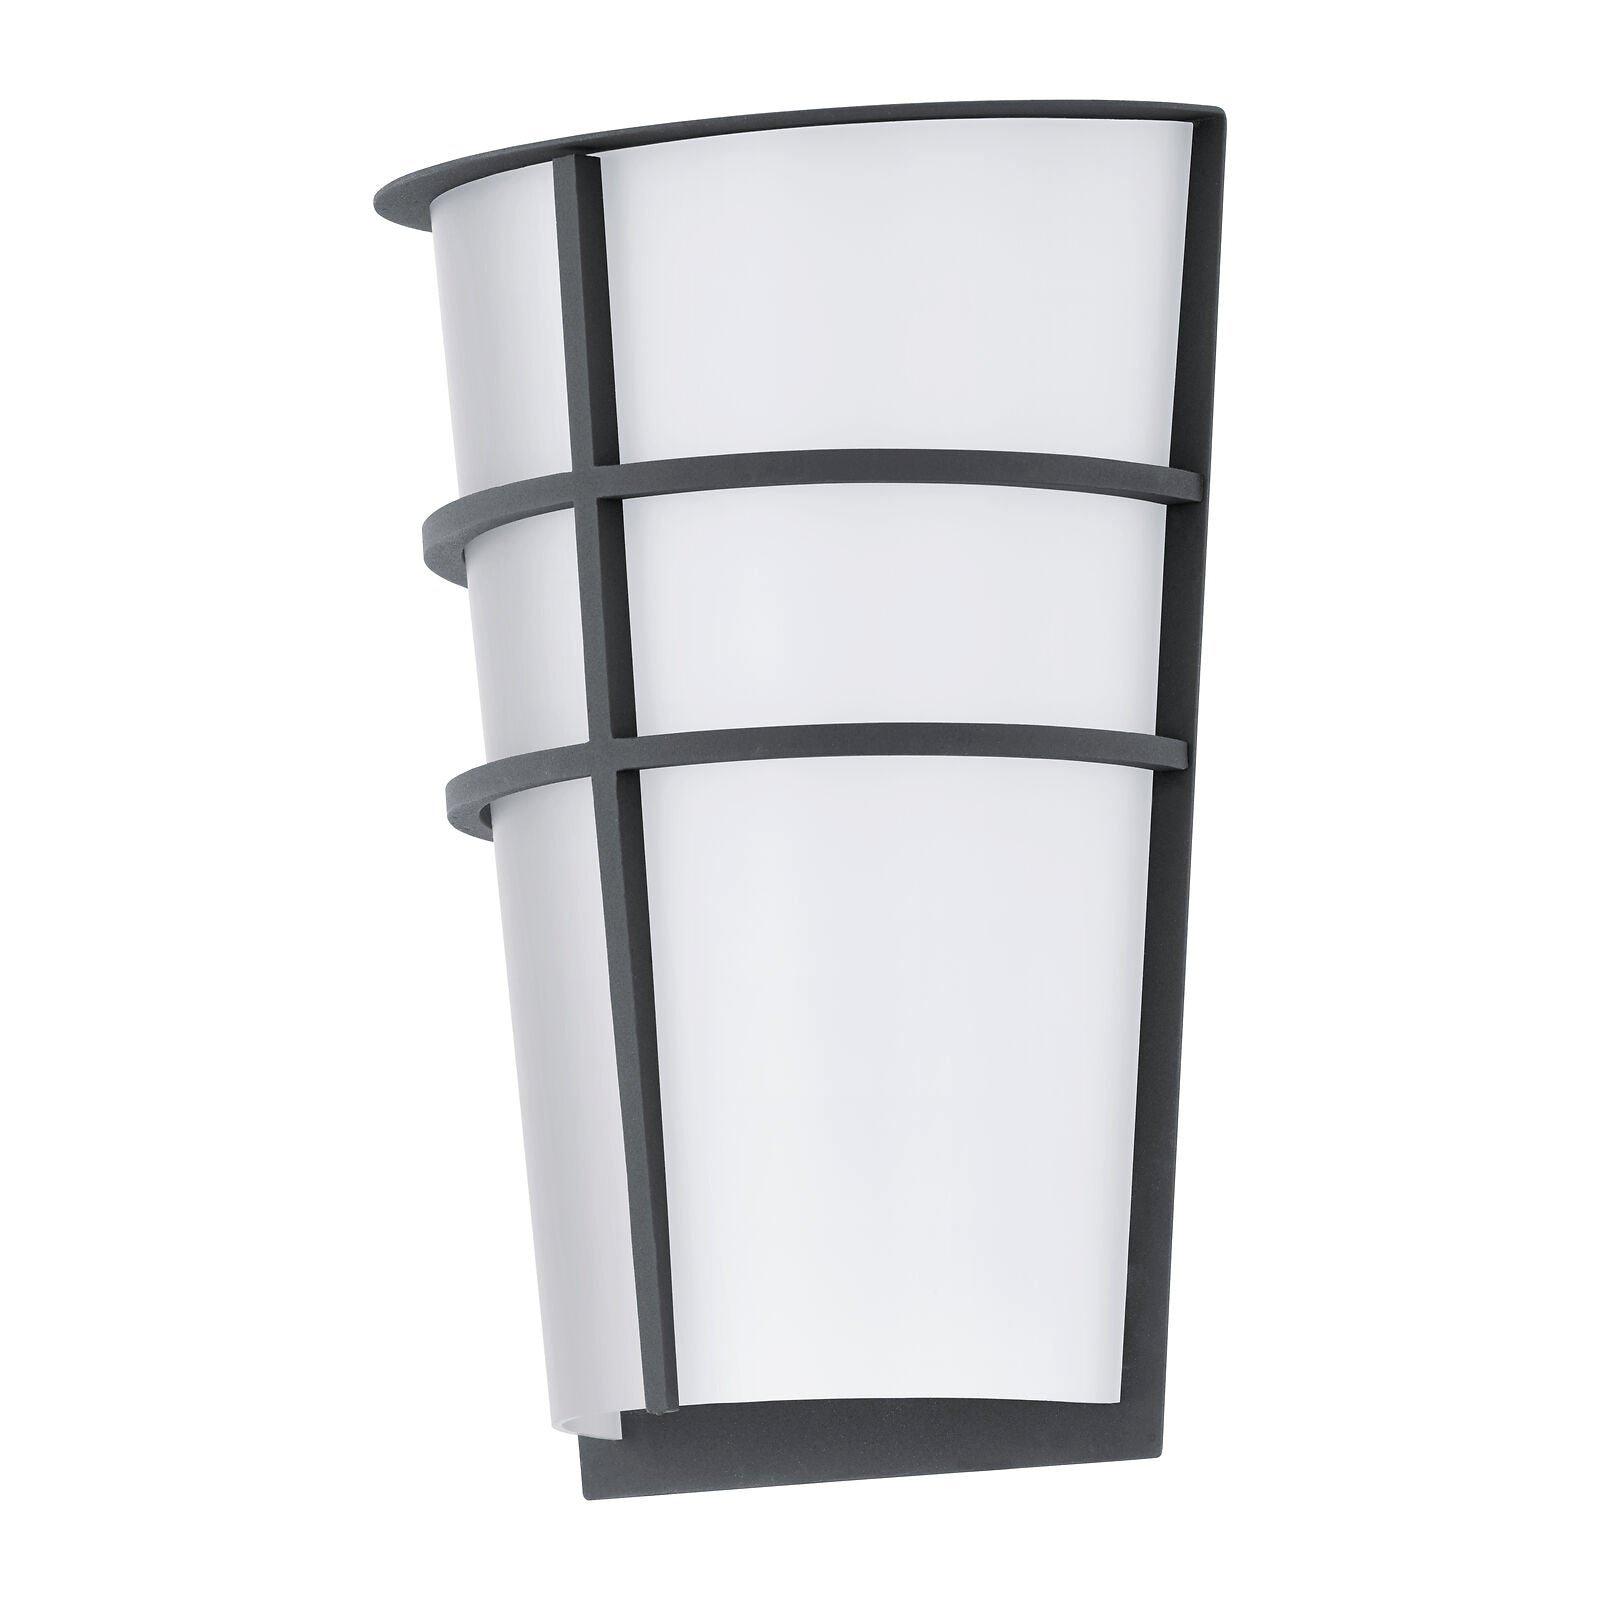 IP44 Outdoor Wall Light Anthracite Modern Diffused Lantern 2.5W Built in LED